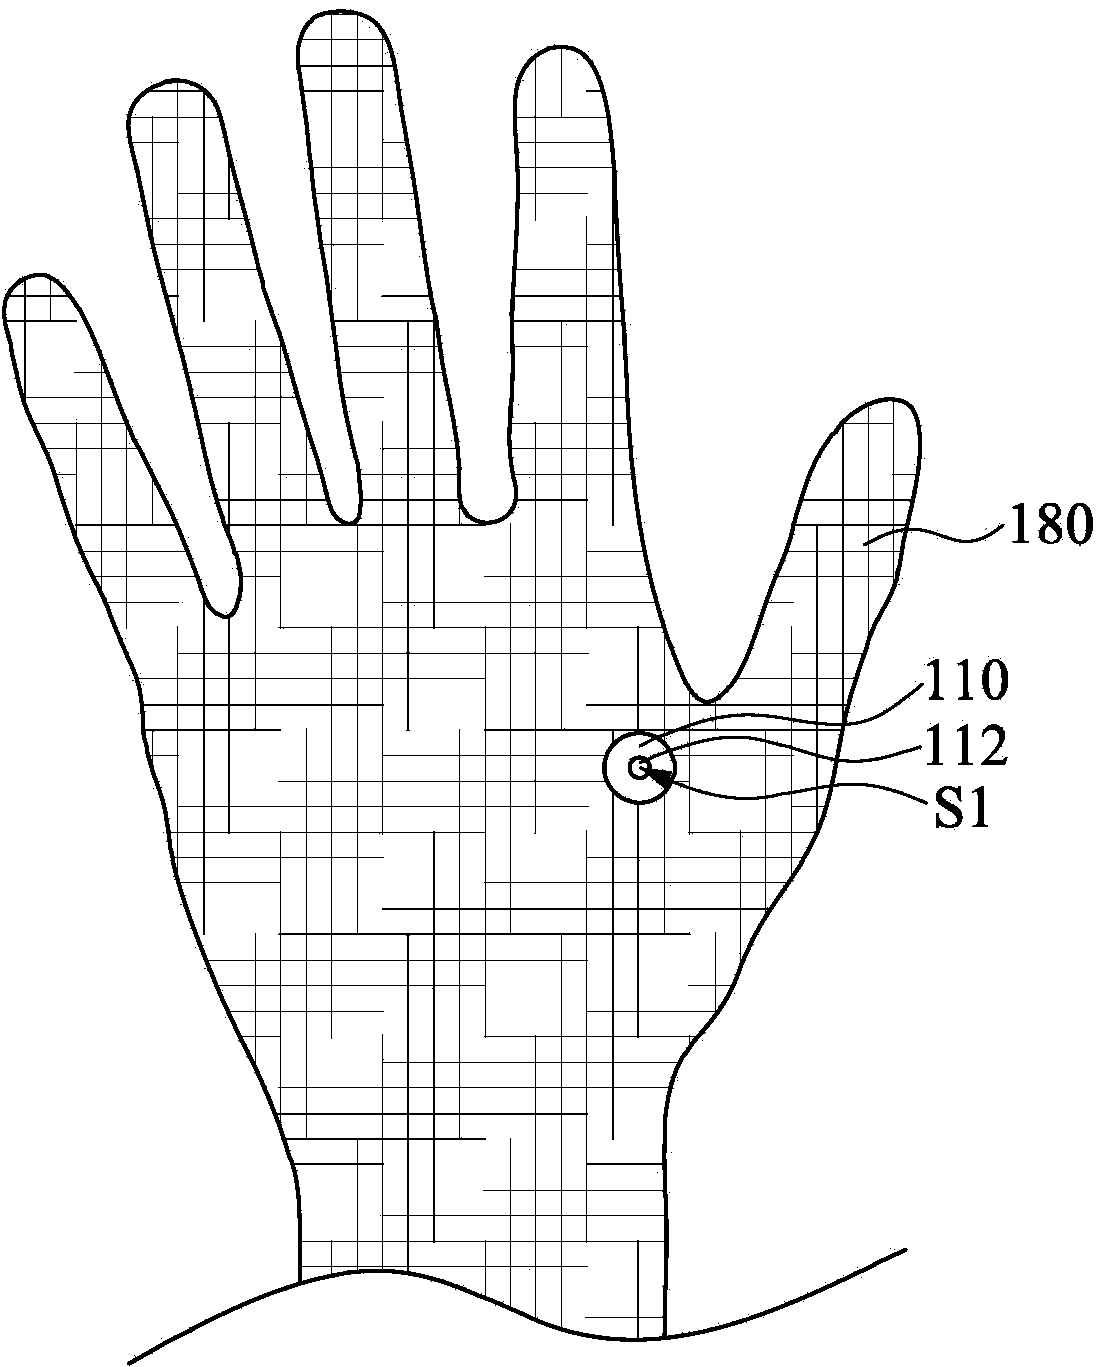 Apparatus for detecting surface microcirculation of acupoint